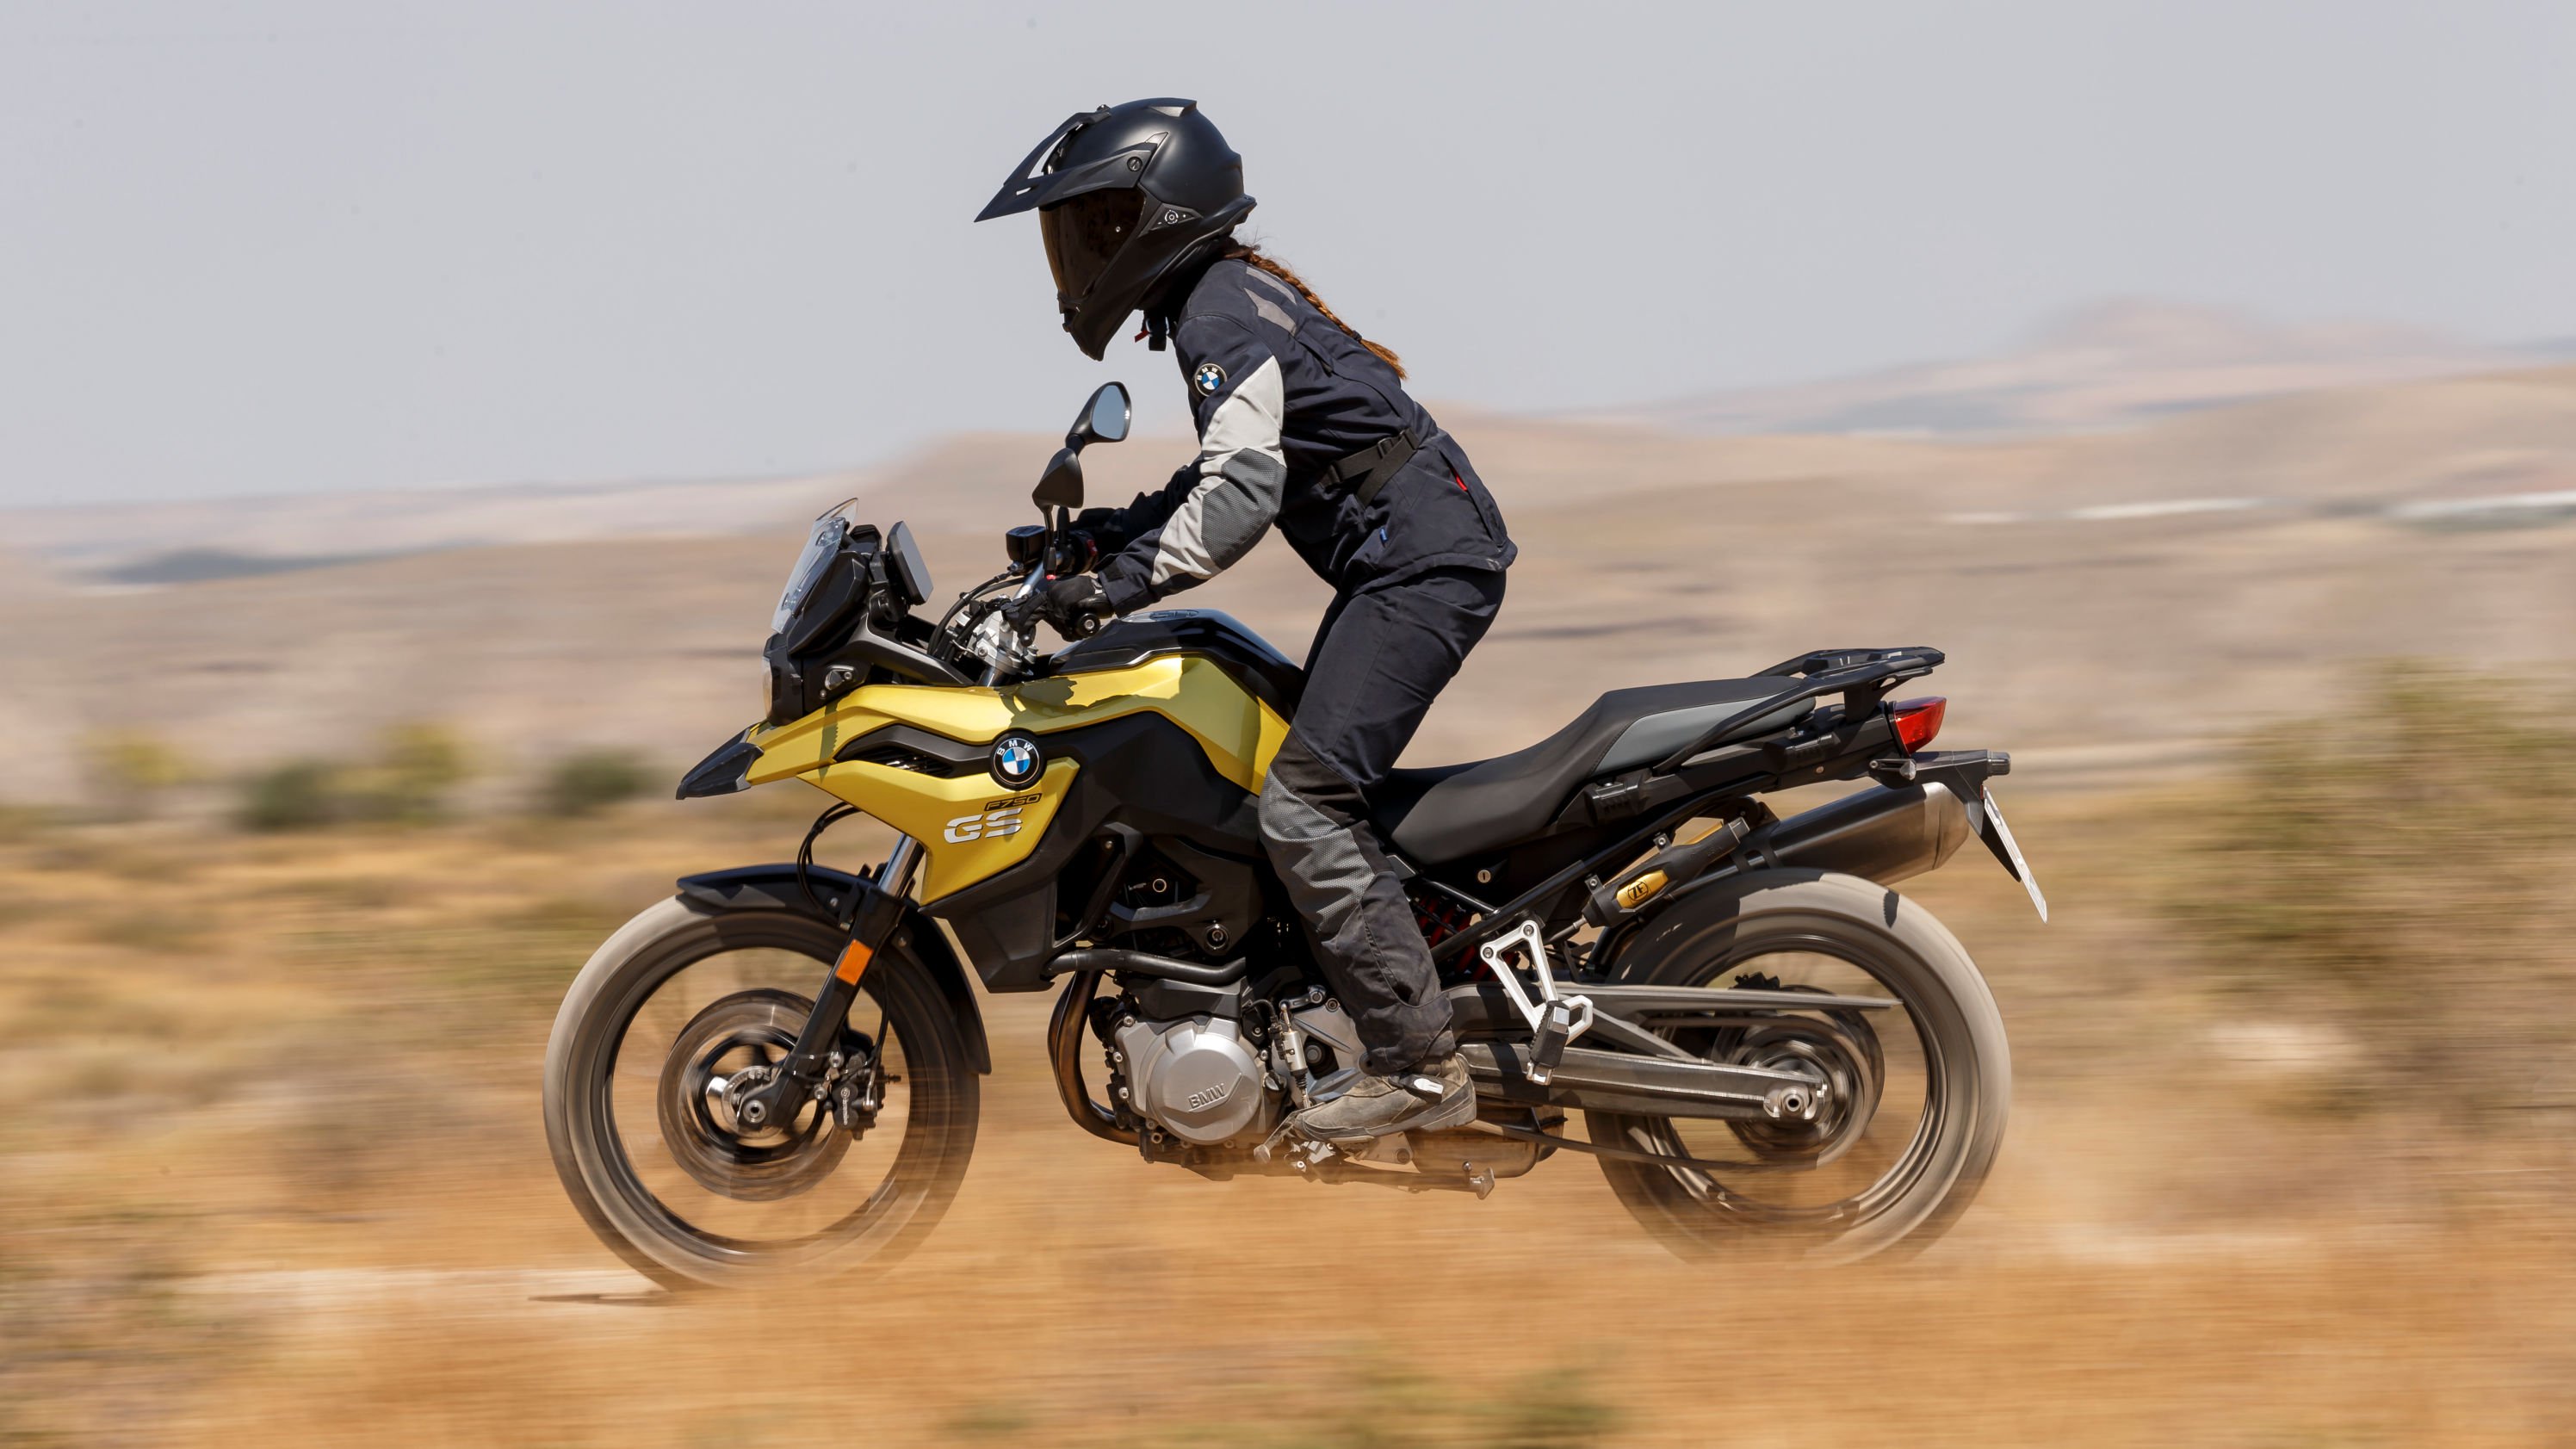 adv maroc; adv morocco; motorcycle rentals; adventure; bmw motorcycle rentals; travel agency; learn surf; tours; activities